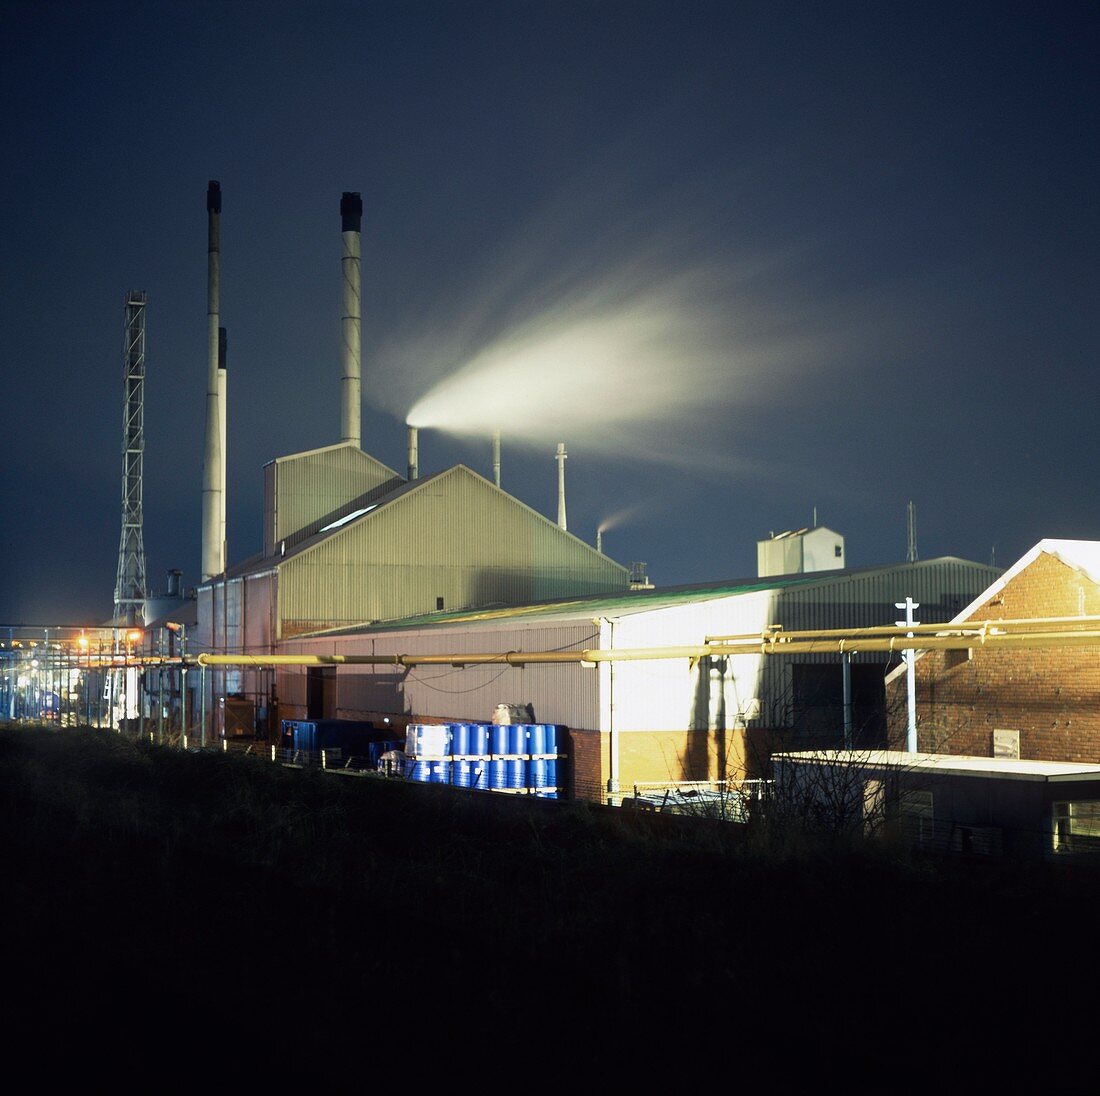 Phosphorous chemical factory at night